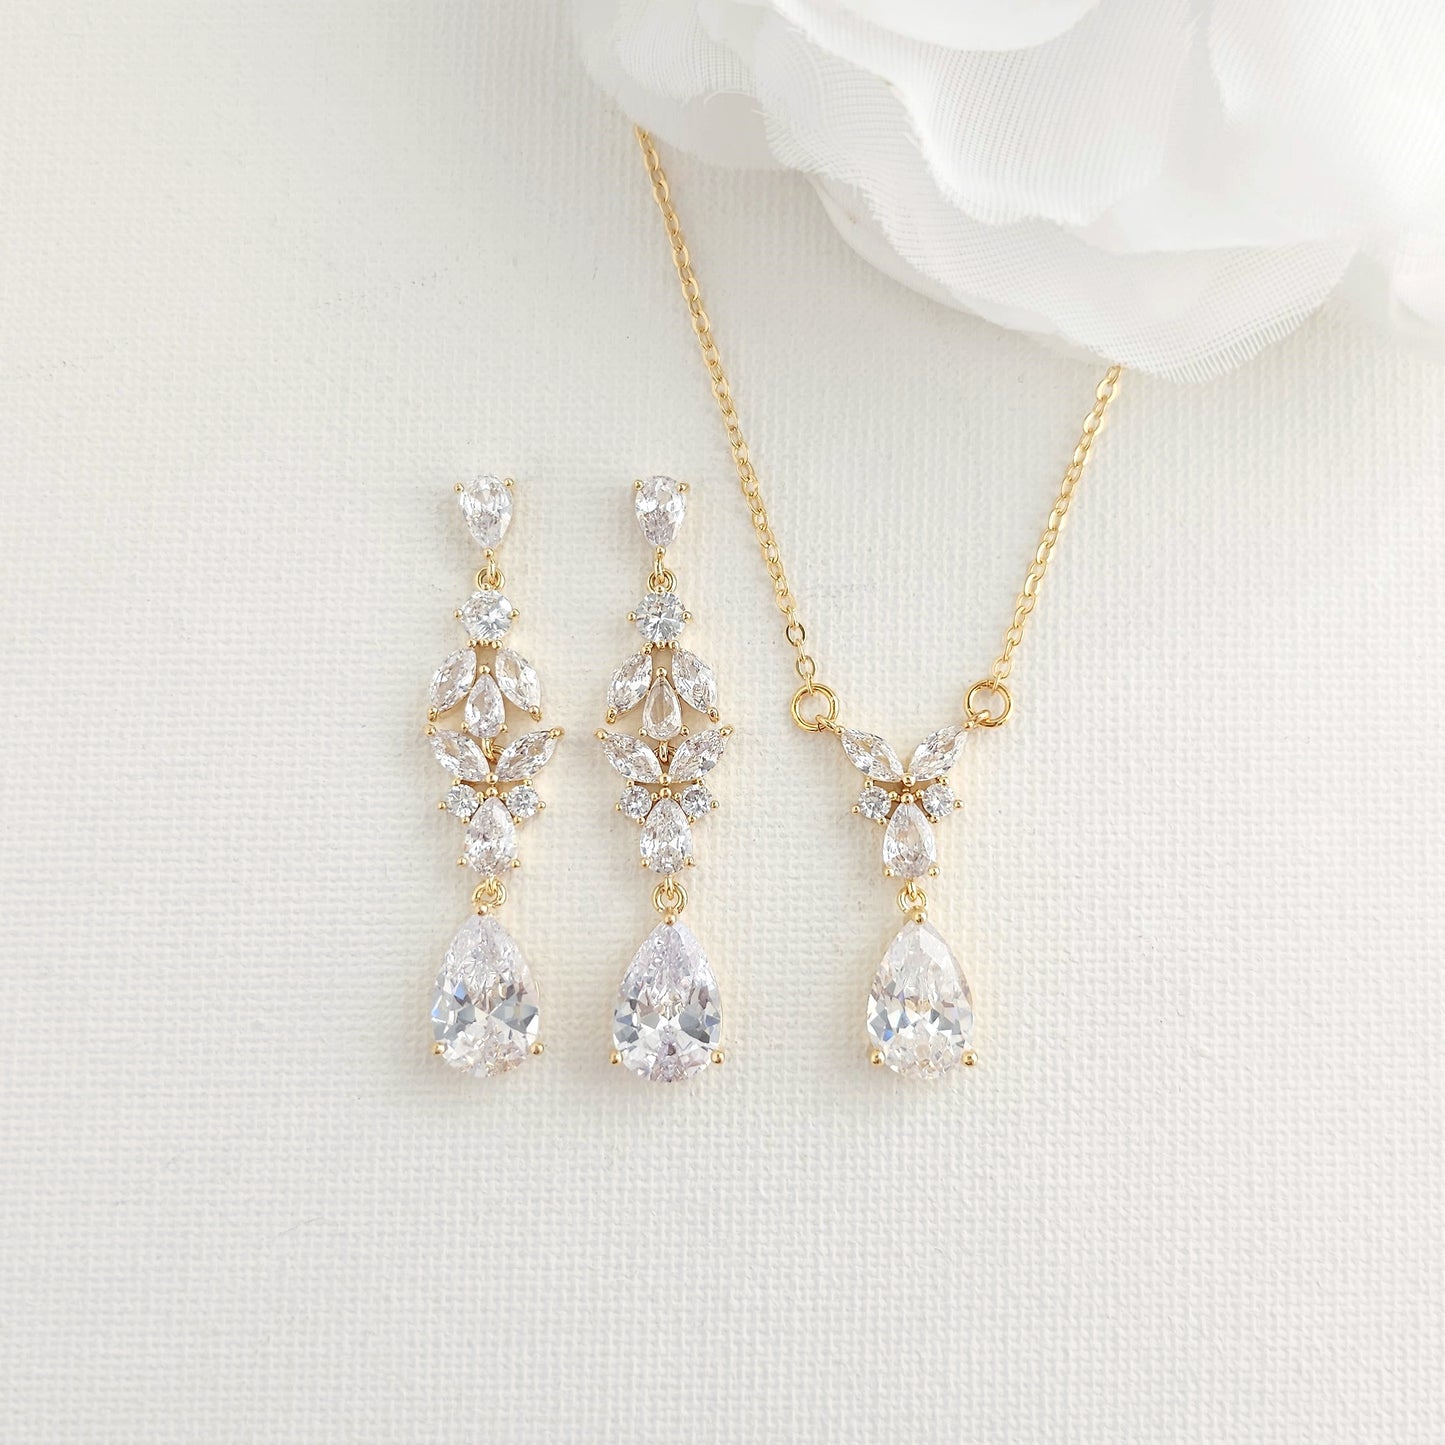 Wedding Jewelry Set in Rose Gold for Brides-Anne